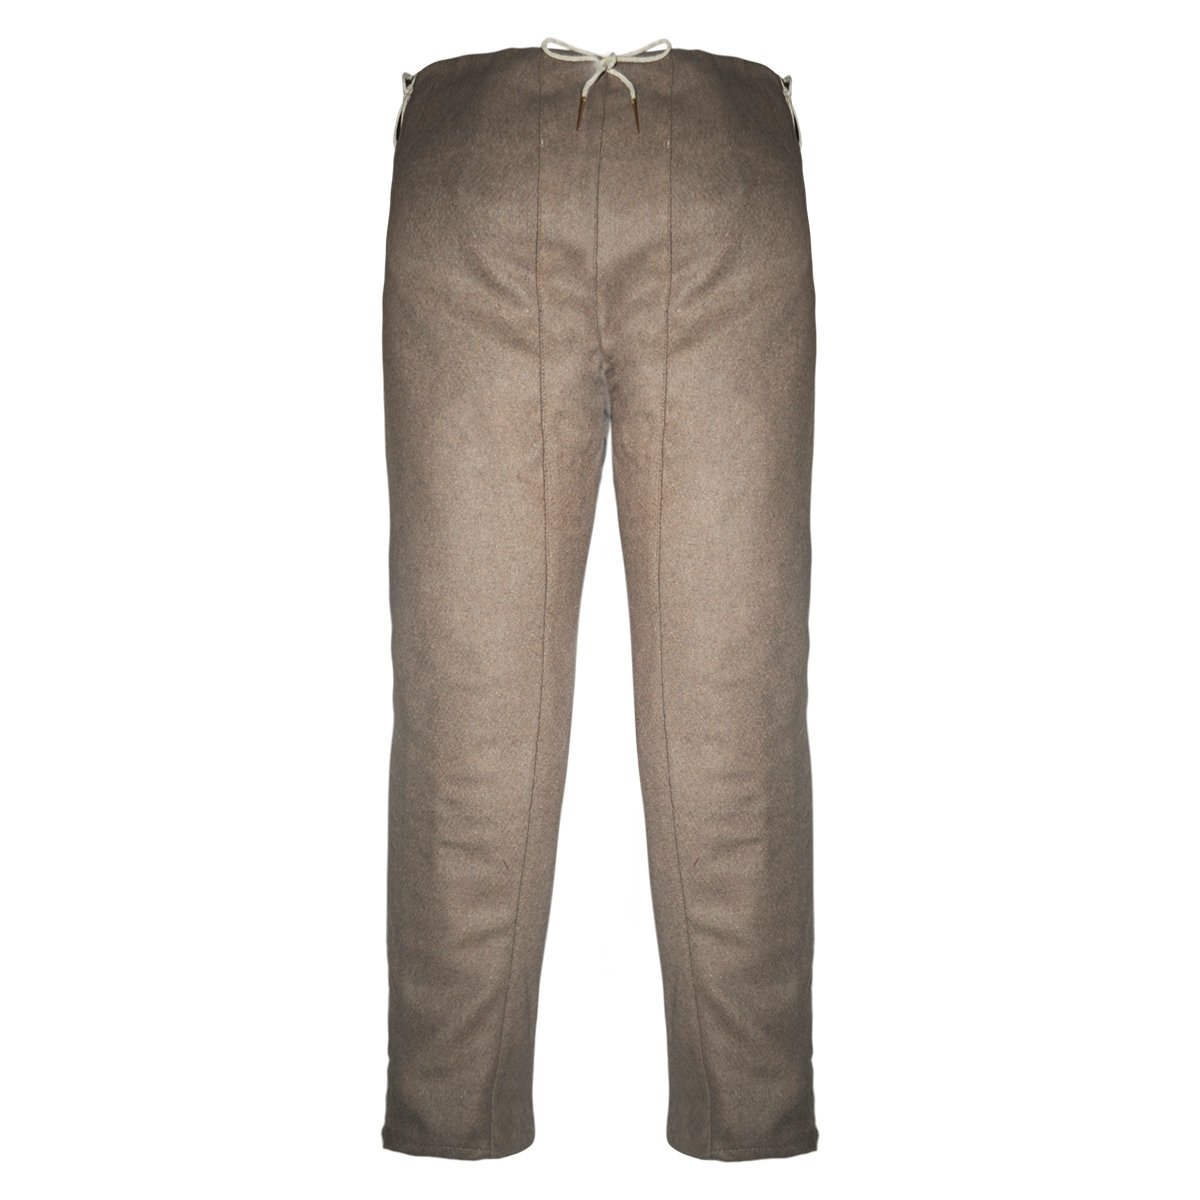 Man's 15th C. Trousers - Natural Brown, Size XL